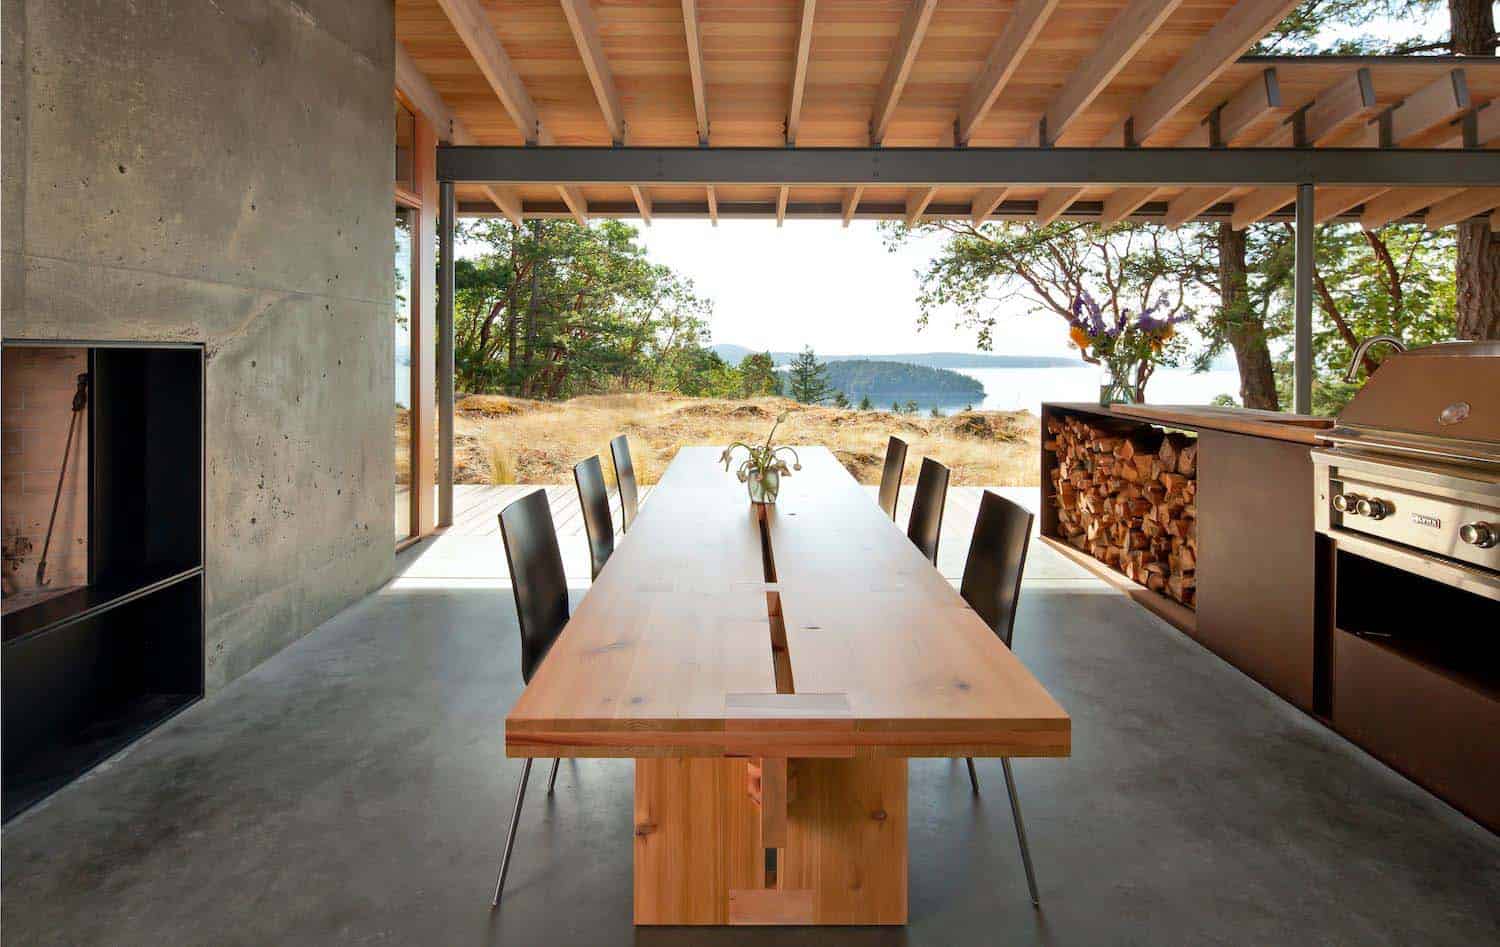 modern covered porch with dining furniture and an outdoor kitchen looking out to nature